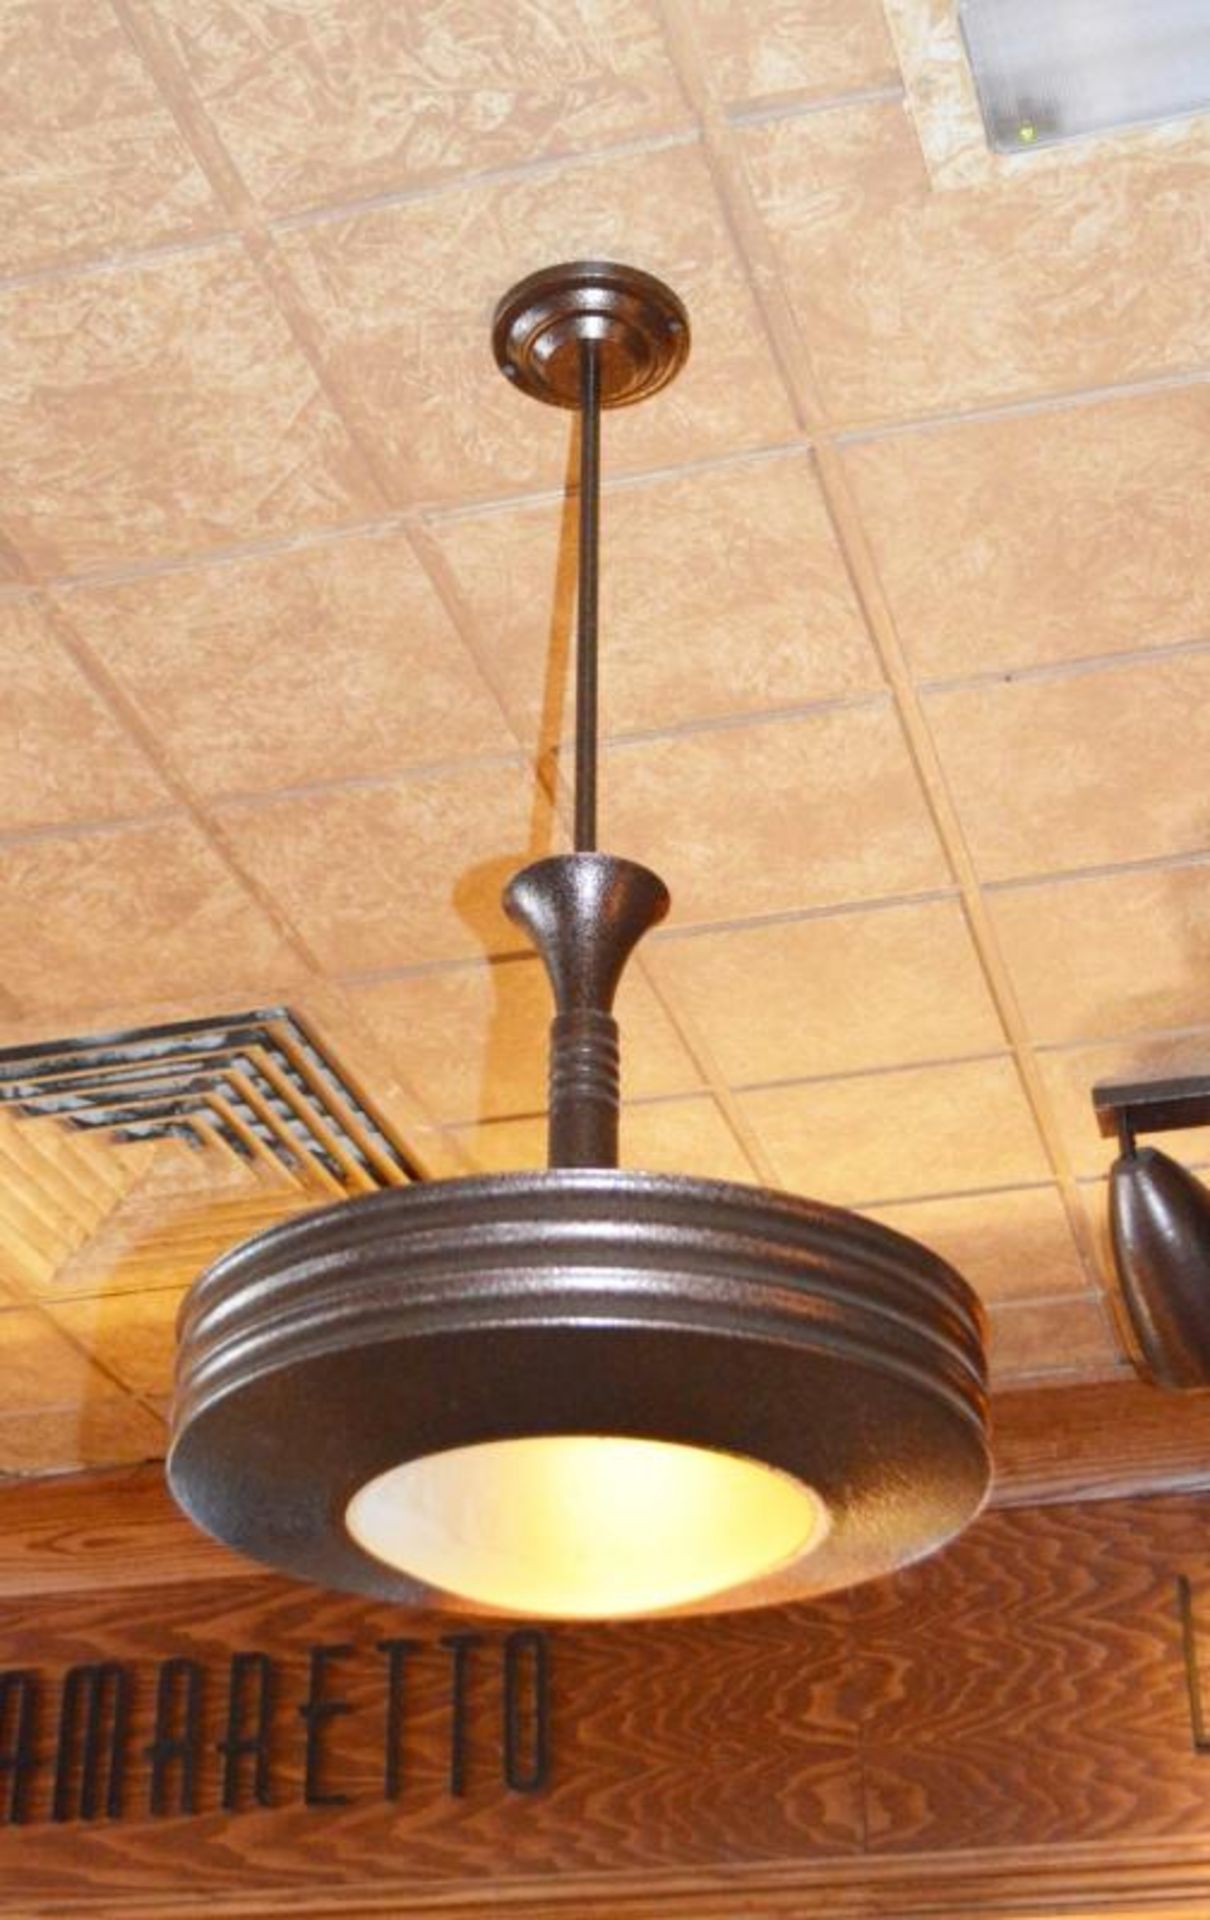 2 x Suspended Ceiling Lights With Brown Pitted Finish - Diameter 40 cm x 80 cm Drop - CL357 - Locati - Image 2 of 3